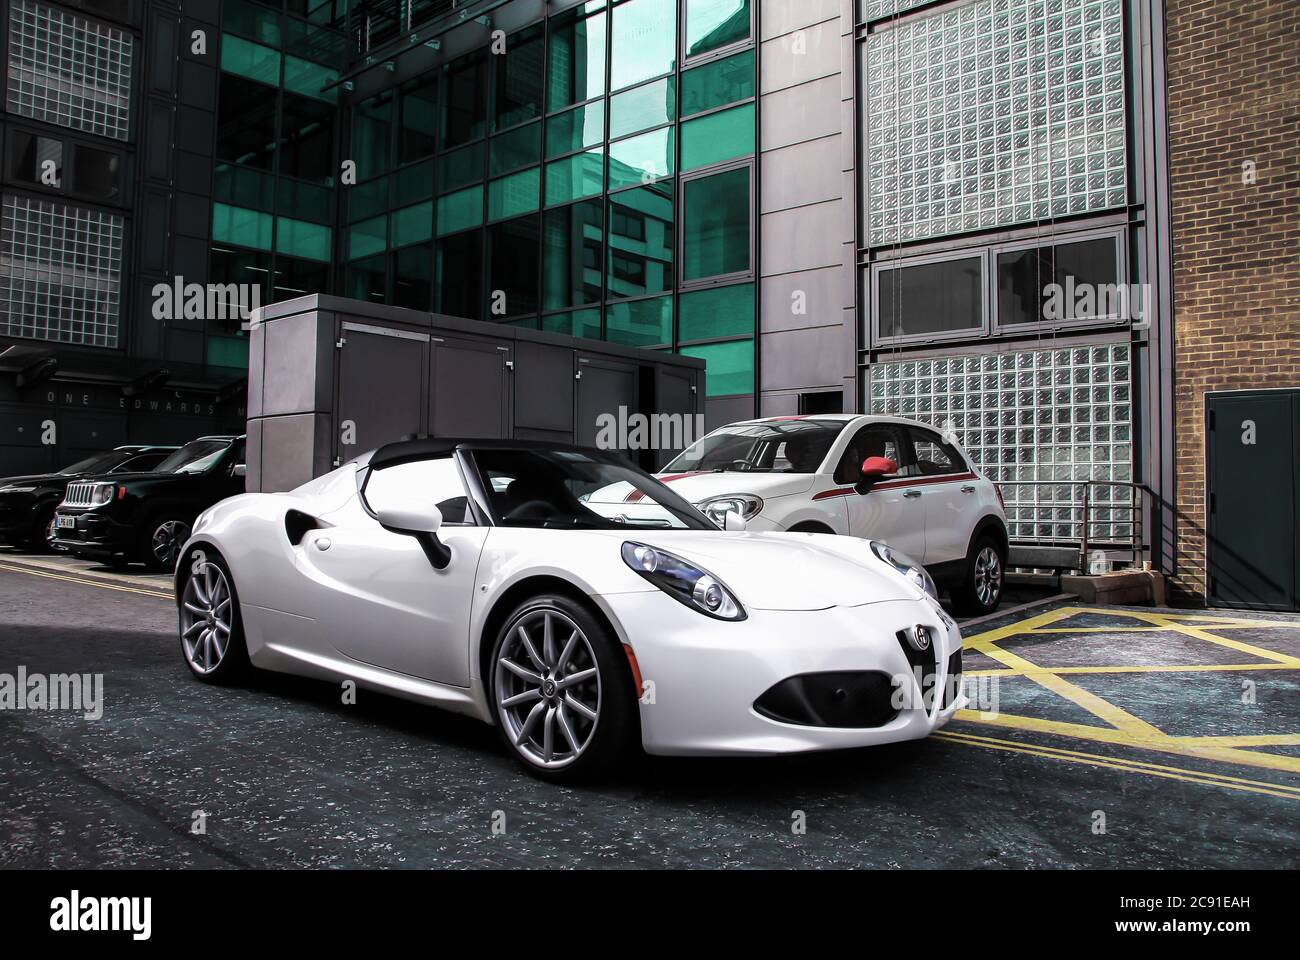 White Alfa Romeo 4C Spider modern sports car parked on a street of Mayfair area of Central London. Stock Photo